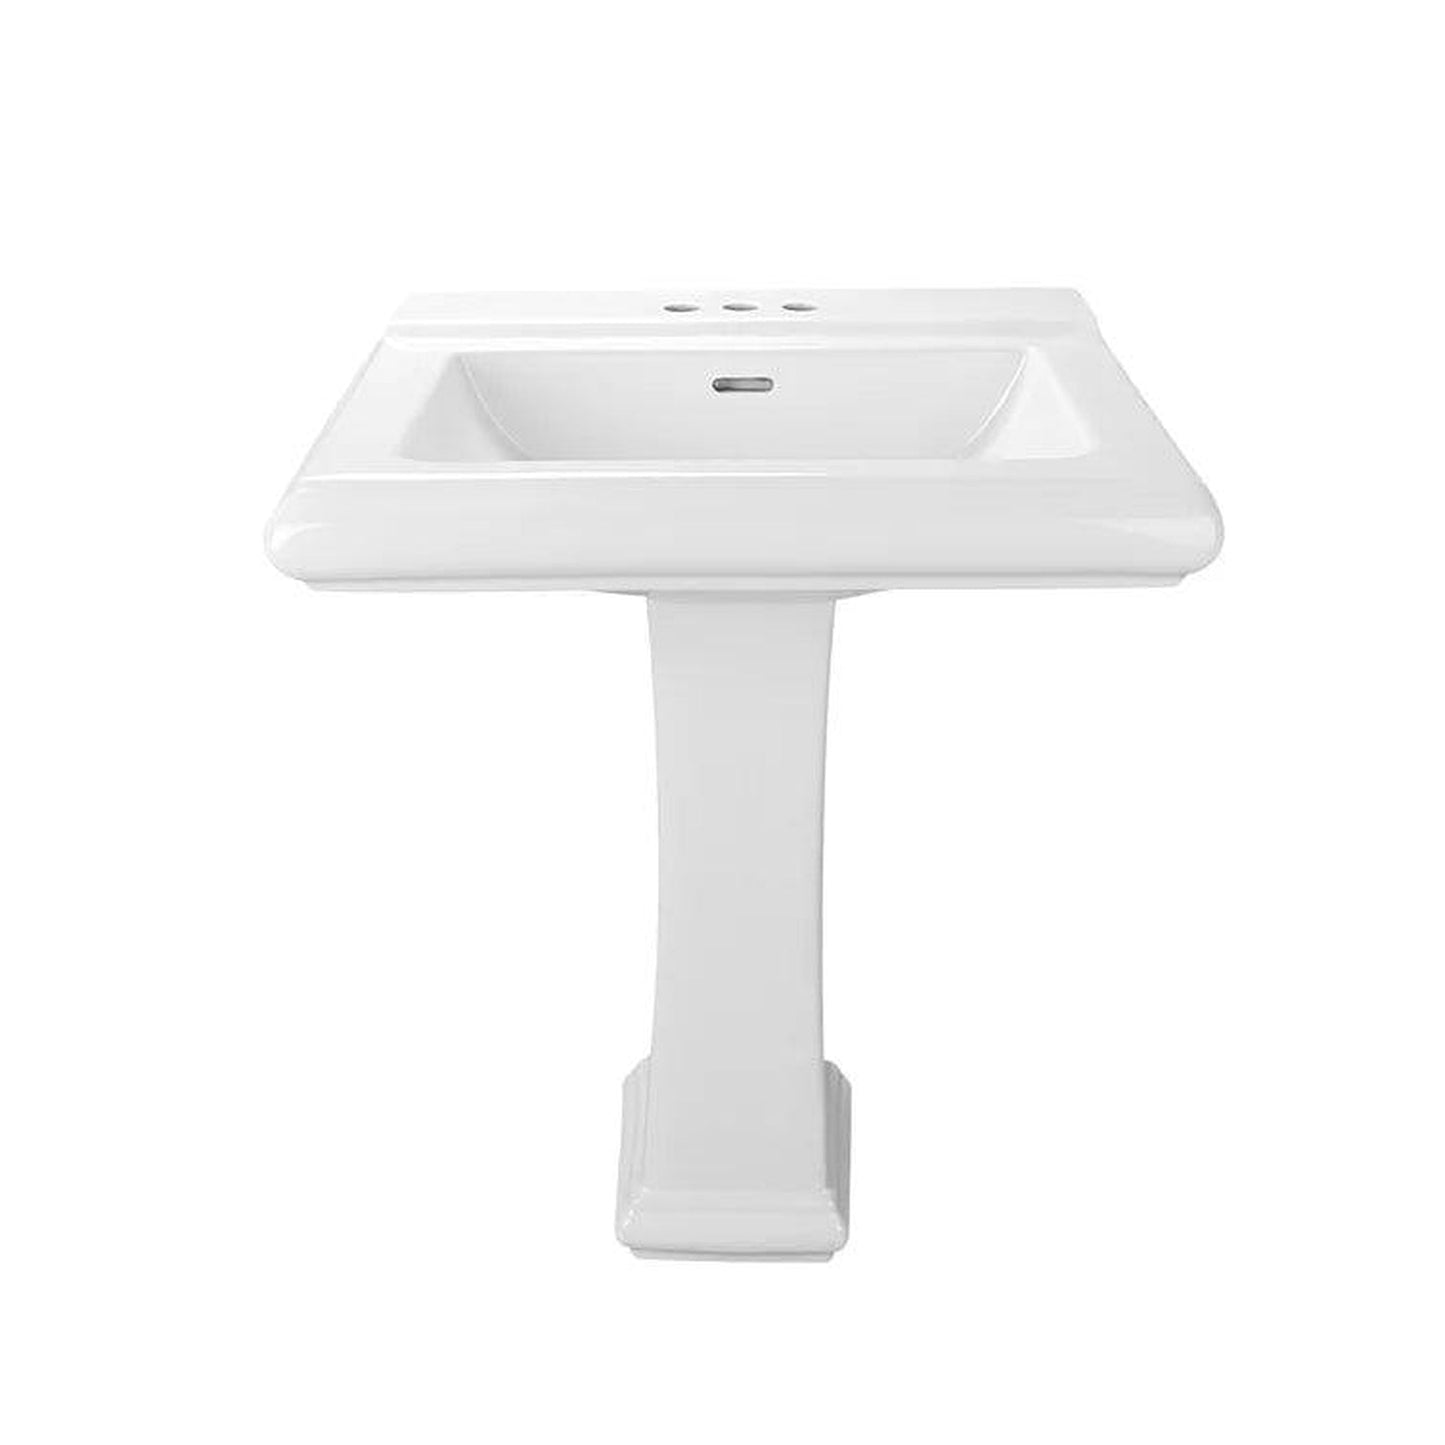 DeerValley Apex 26" x 20" Rectangular White Pedestal Bathroom Sink With Three Faucet Holes and Overflow Hole